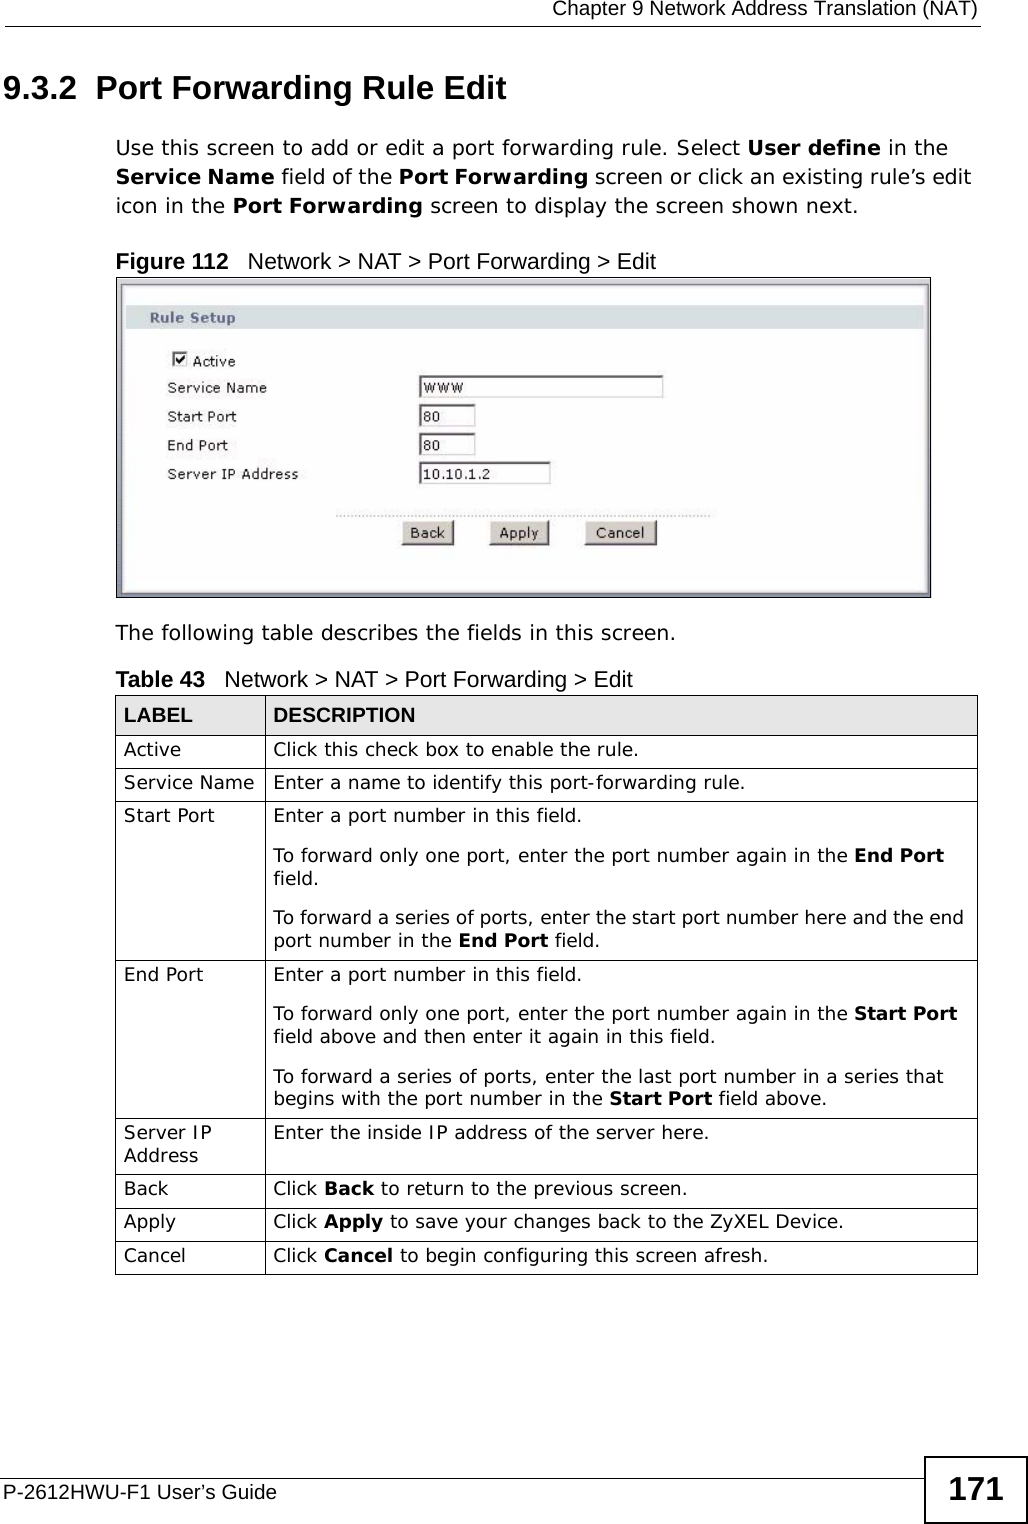  Chapter 9 Network Address Translation (NAT)P-2612HWU-F1 User’s Guide 1719.3.2  Port Forwarding Rule Edit Use this screen to add or edit a port forwarding rule. Select User define in the Service Name field of the Port Forwarding screen or click an existing rule’s edit icon in the Port Forwarding screen to display the screen shown next. Figure 112   Network &gt; NAT &gt; Port Forwarding &gt; Edit  The following table describes the fields in this screen. Table 43   Network &gt; NAT &gt; Port Forwarding &gt; Edit LABEL DESCRIPTIONActive Click this check box to enable the rule.Service Name Enter a name to identify this port-forwarding rule.Start Port  Enter a port number in this field. To forward only one port, enter the port number again in the End Port field. To forward a series of ports, enter the start port number here and the end port number in the End Port field.End Port  Enter a port number in this field. To forward only one port, enter the port number again in the Start Port field above and then enter it again in this field. To forward a series of ports, enter the last port number in a series that begins with the port number in the Start Port field above.Server IP Address Enter the inside IP address of the server here.Back Click Back to return to the previous screen.Apply Click Apply to save your changes back to the ZyXEL Device.Cancel Click Cancel to begin configuring this screen afresh.